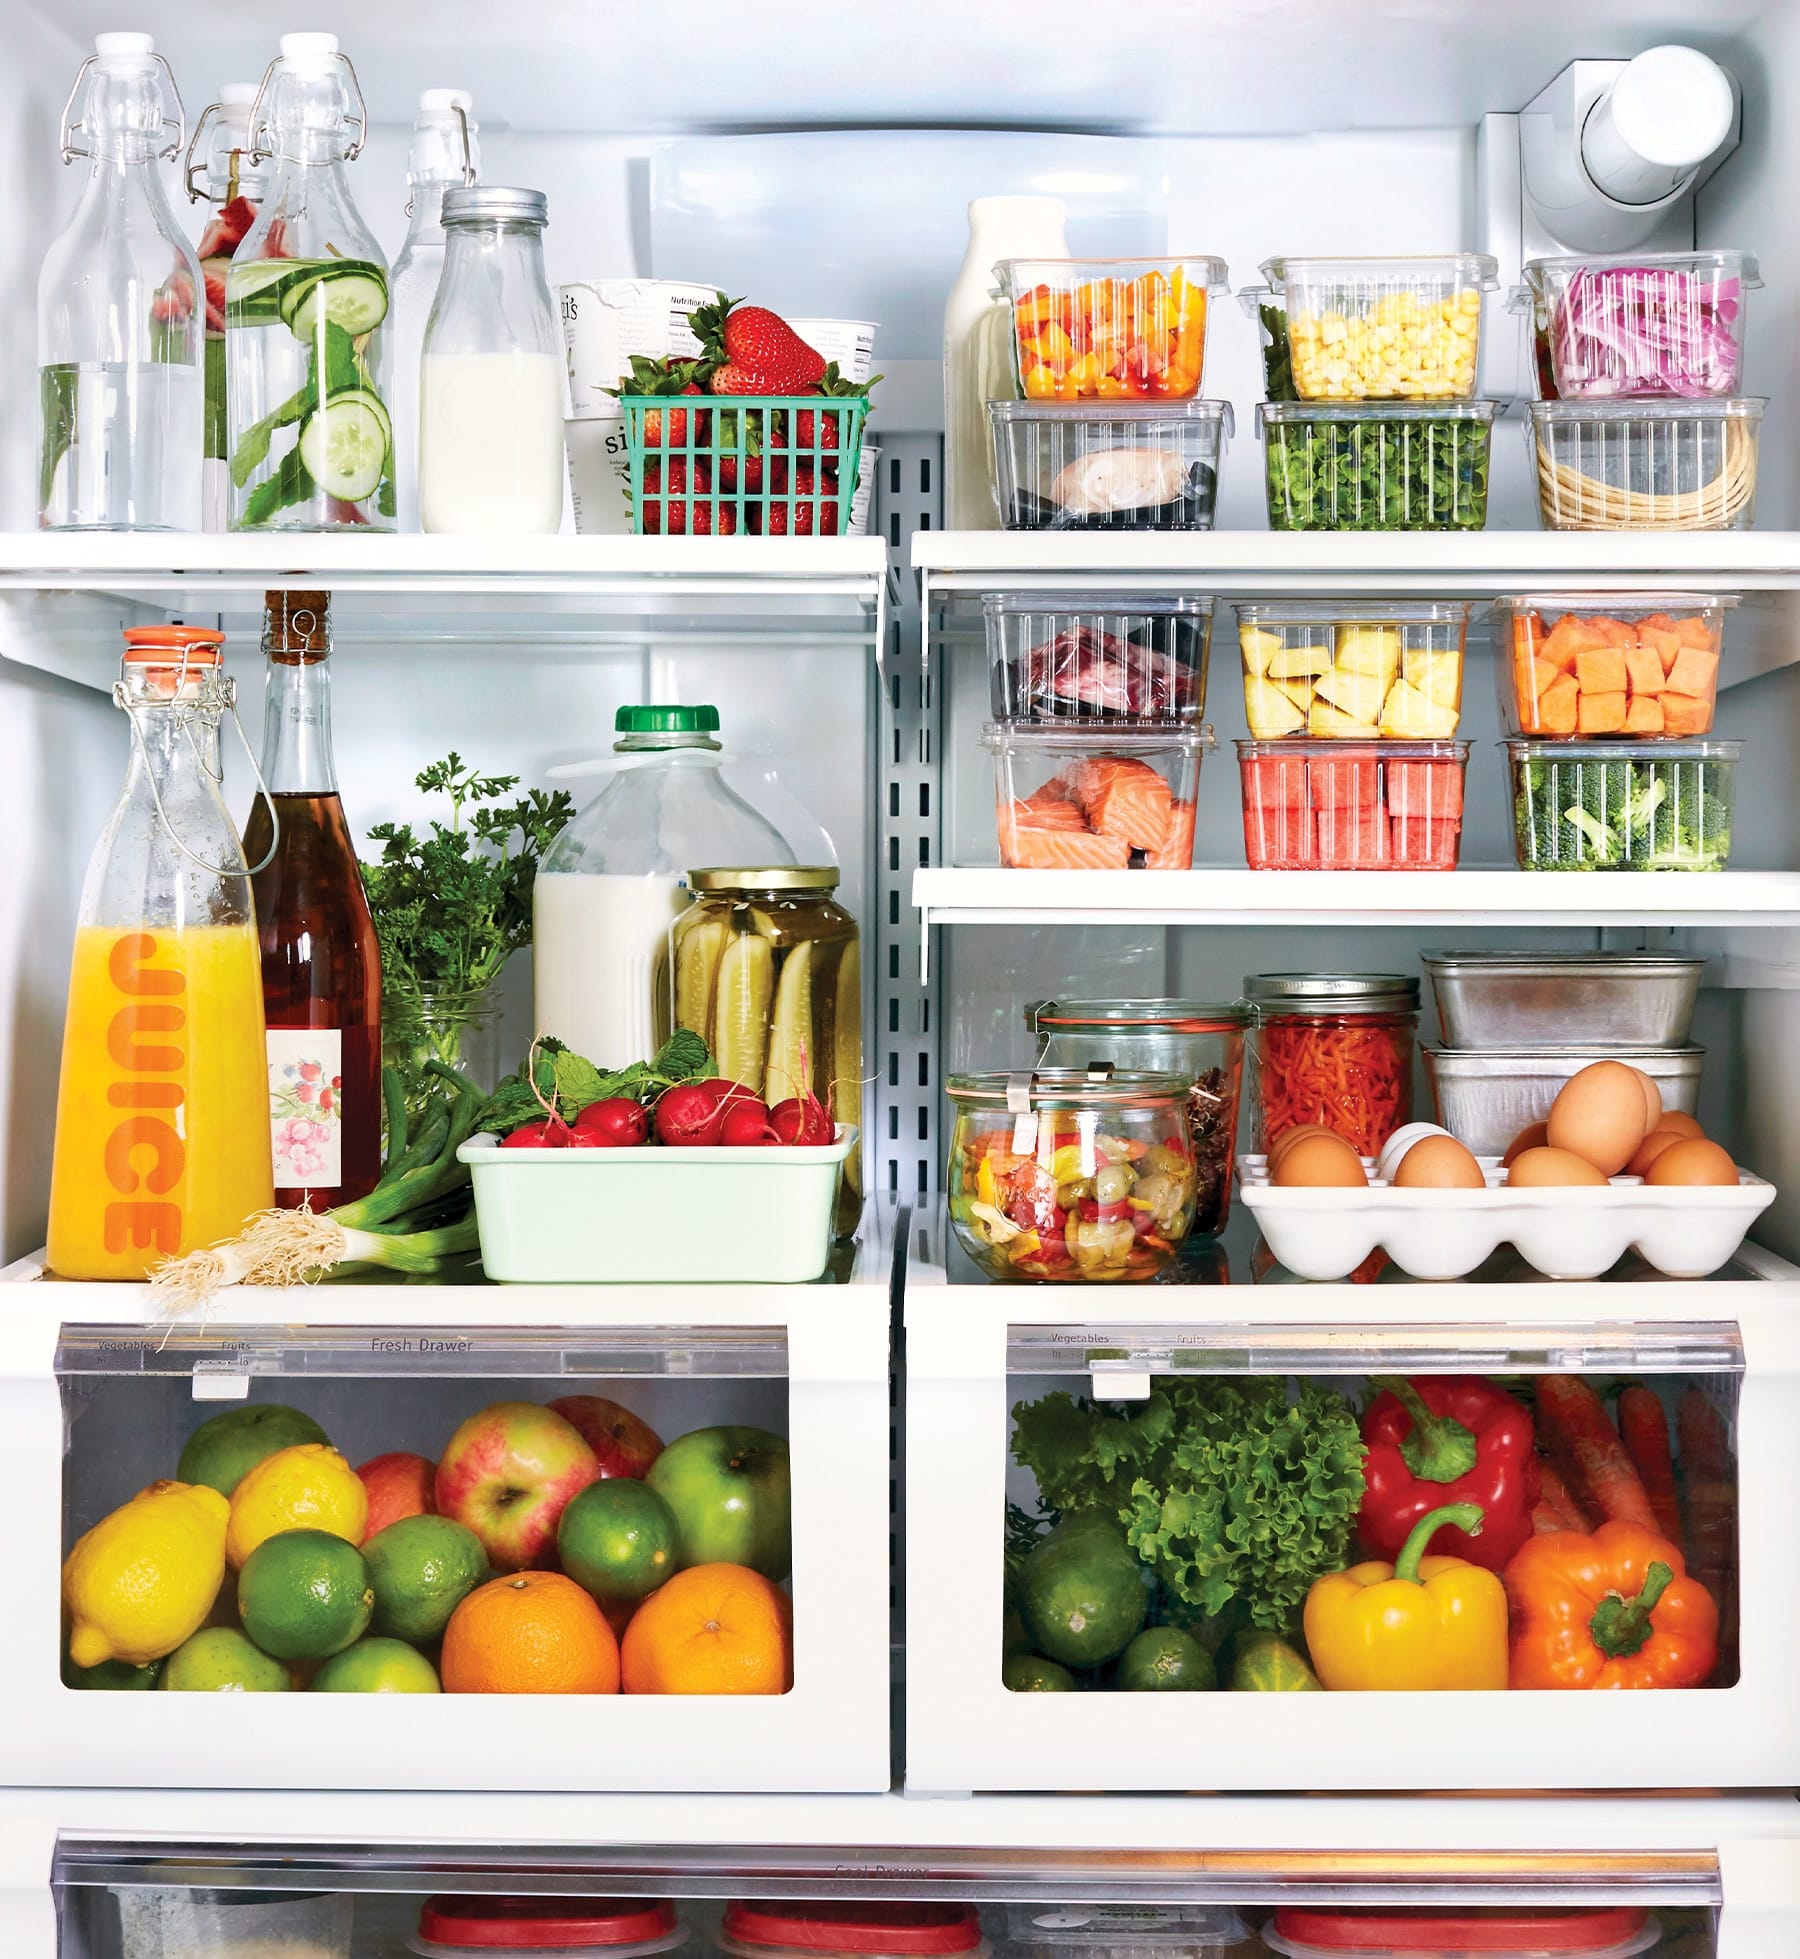 Produce Saver Storage Containers - Fresh Vegetable Fruit Storage Containers - Fridge Food Storage Containers - Keep Vegetables Fresh Easy to Clean